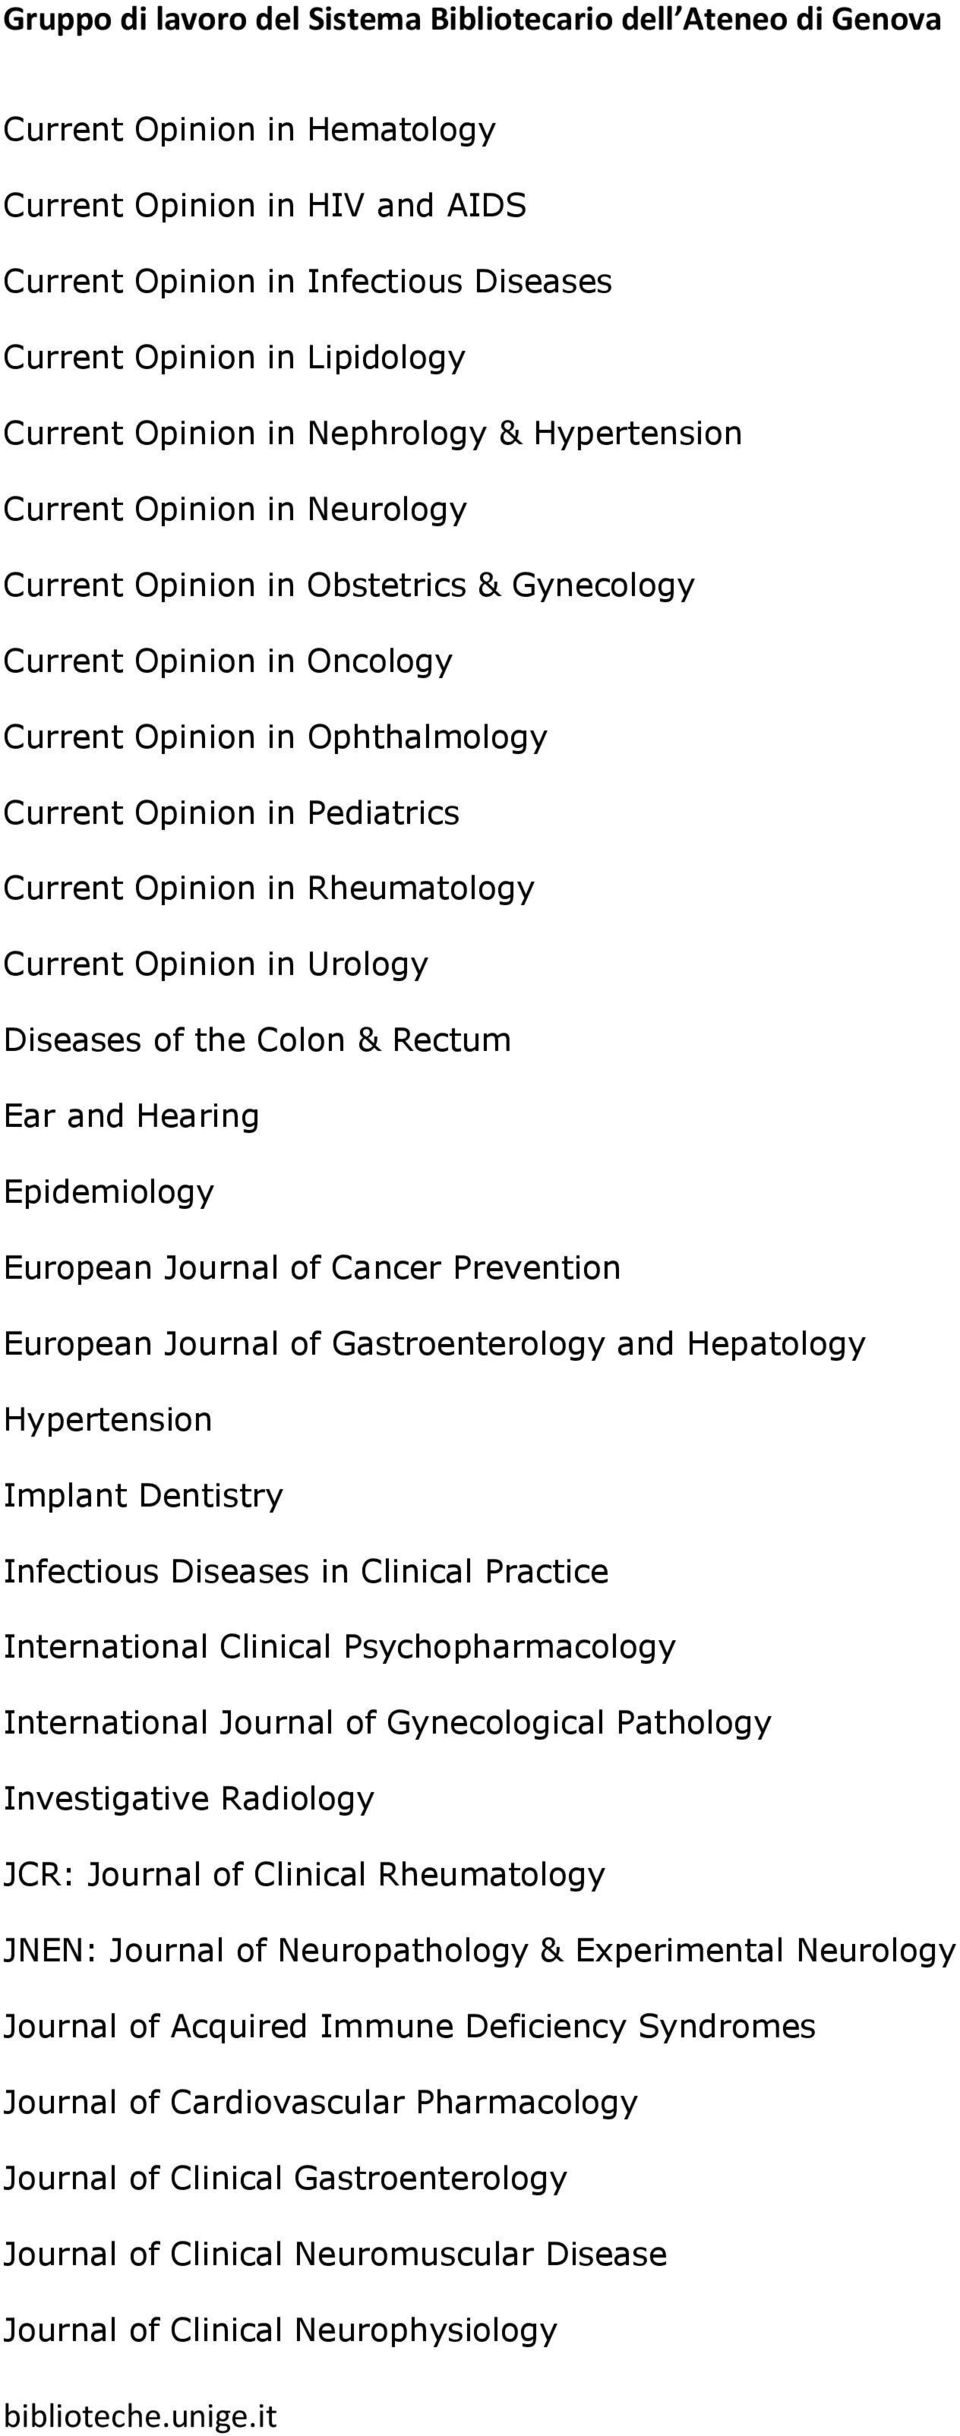 Urology Diseases of the Colon & Rectum Ear and Hearing Epidemiology European Journal of Cancer Prevention European Journal of Gastroenterology and Hepatology Hypertension Implant Dentistry Infectious